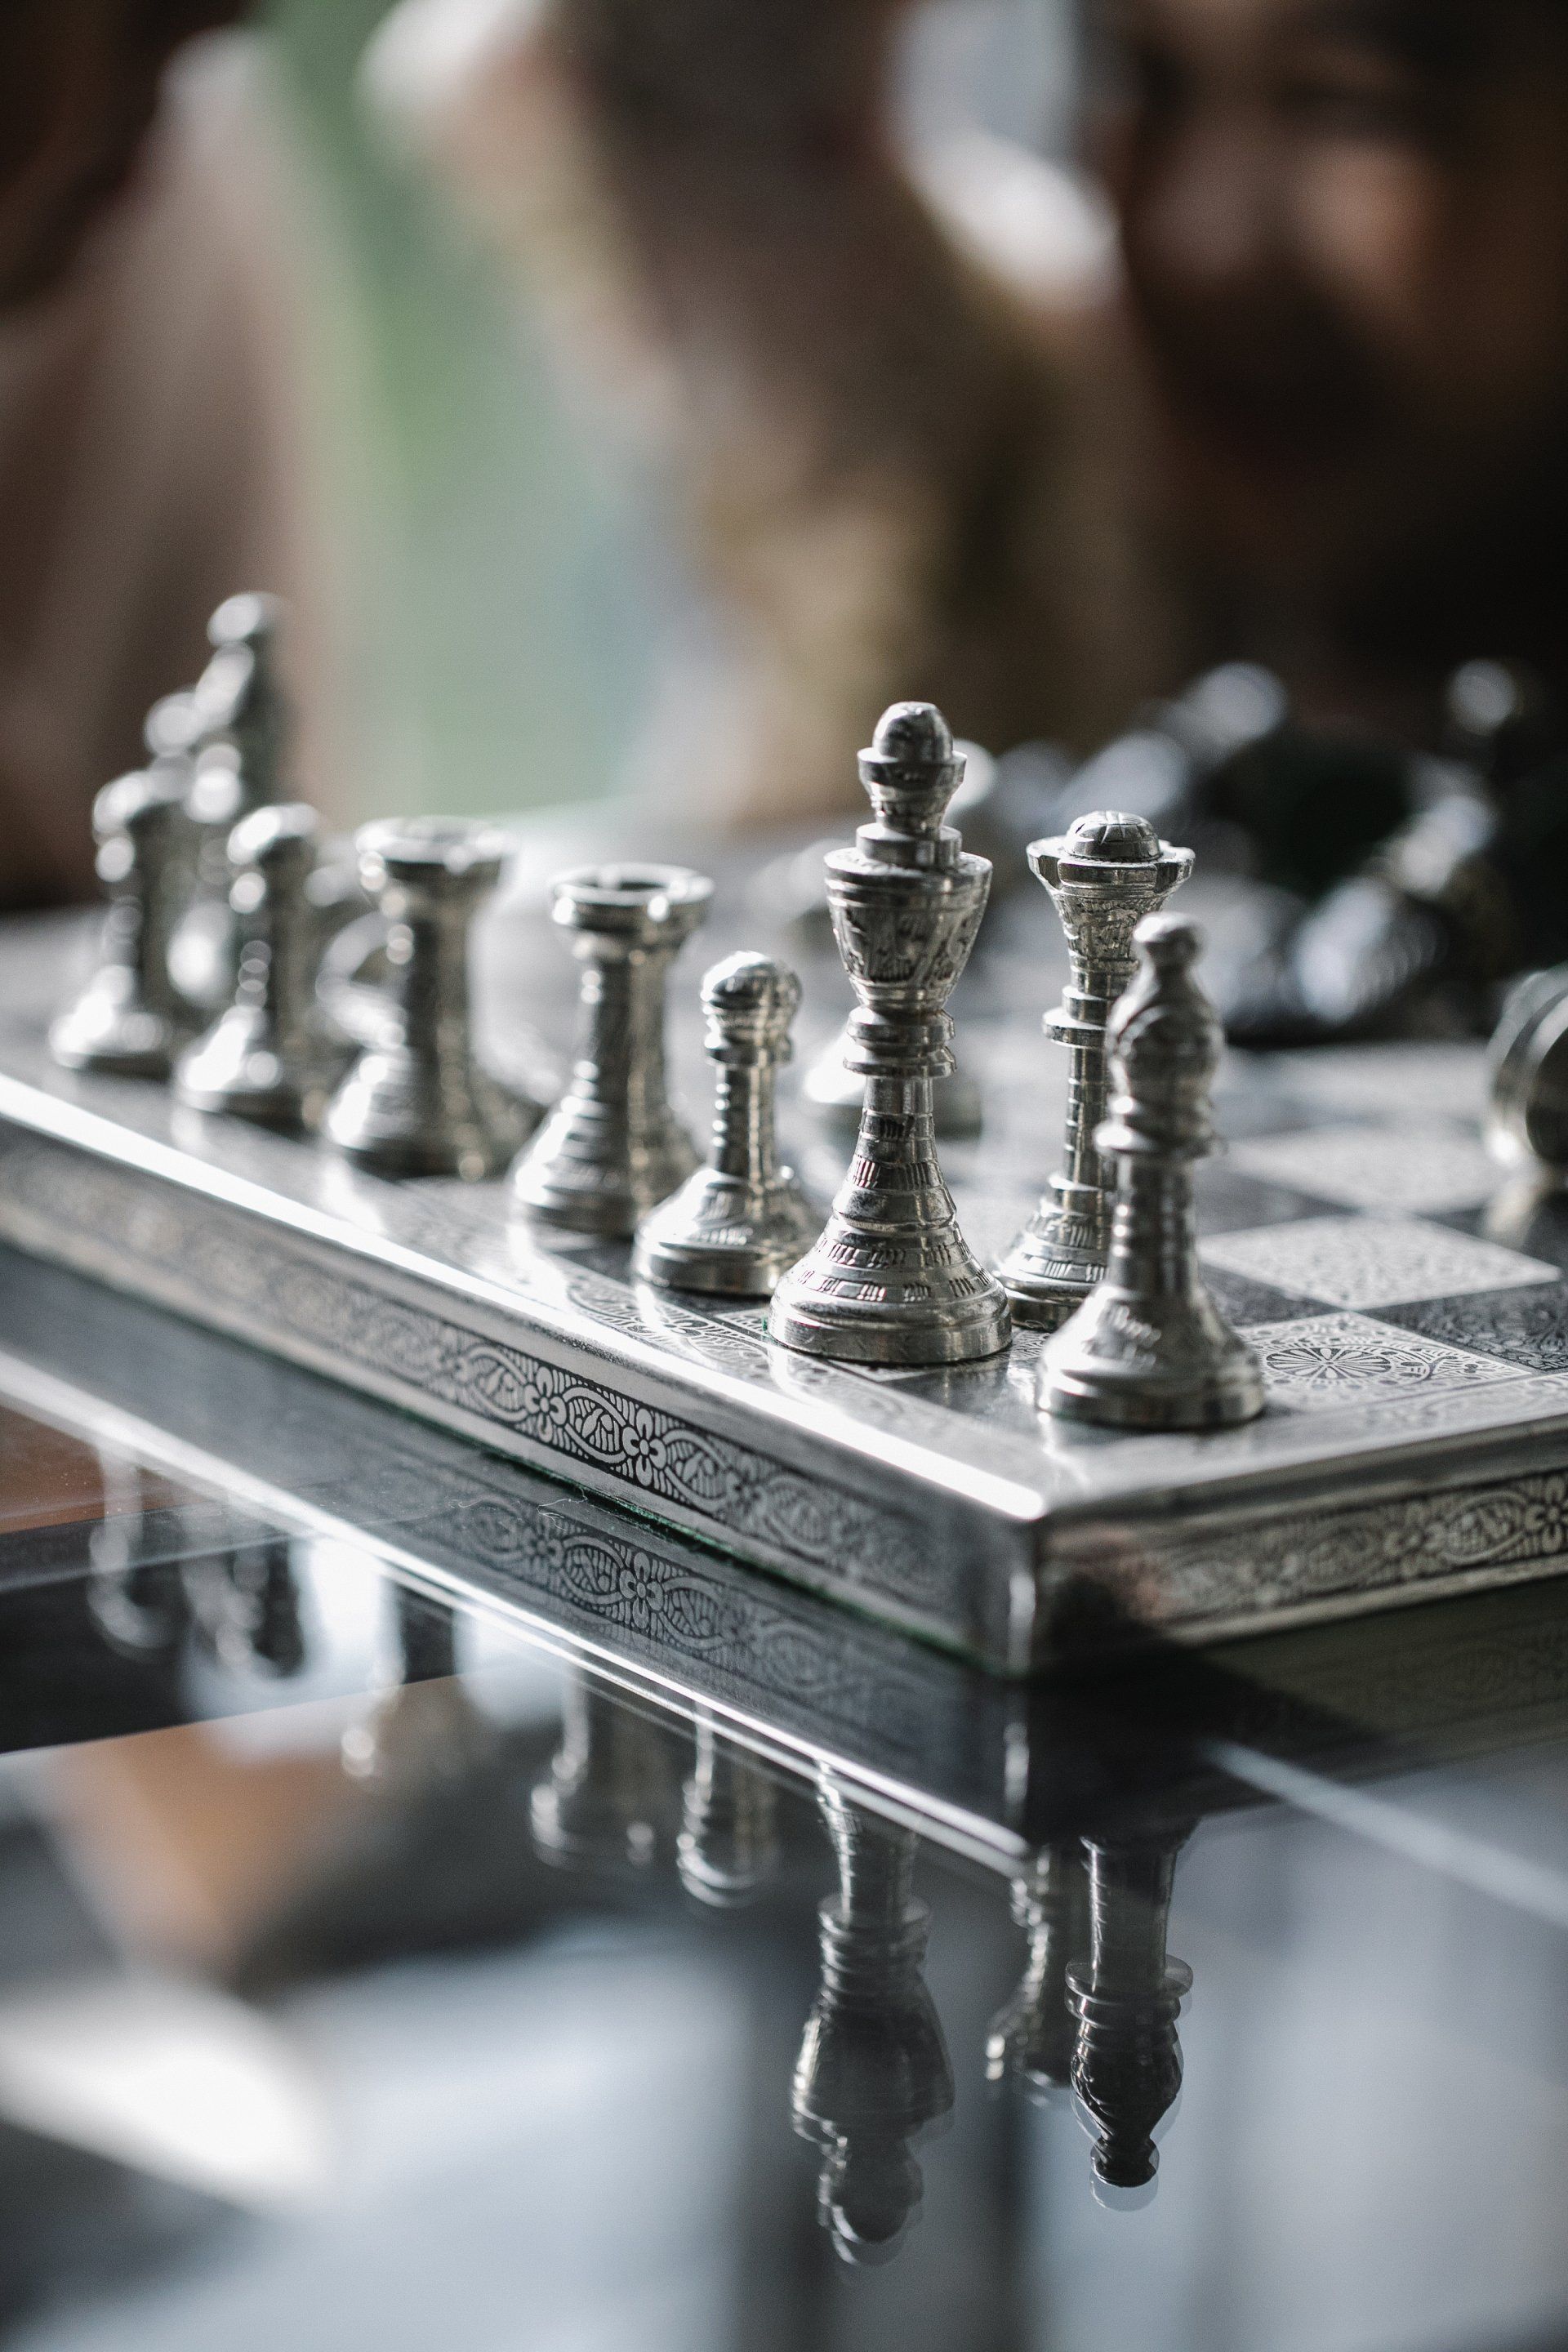 A close up of a chess board with chess pieces on it.